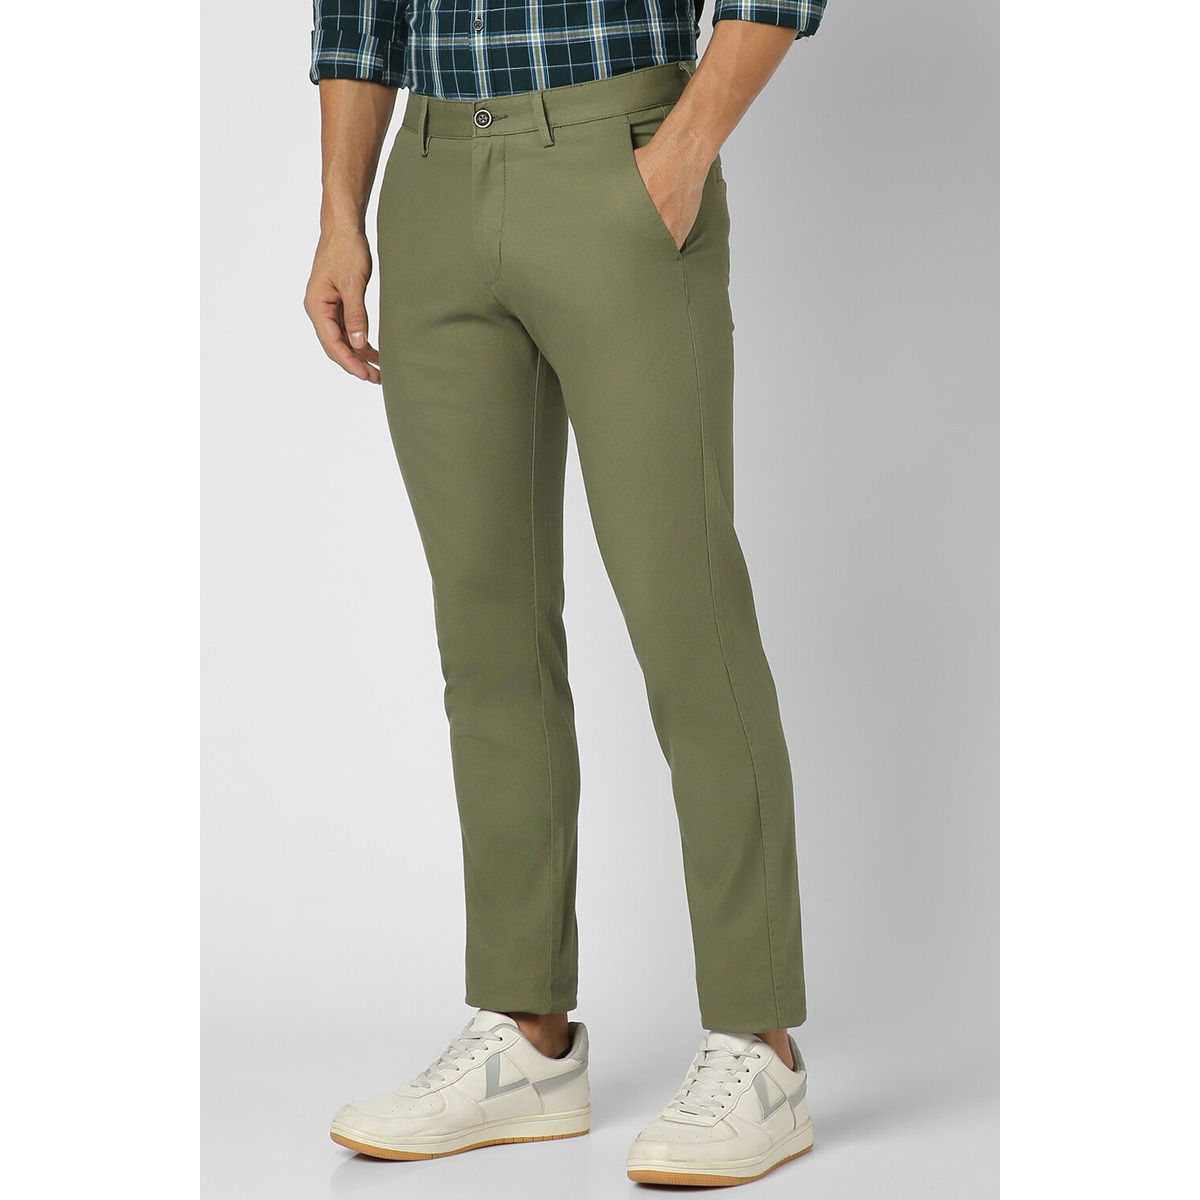 Buy Peter England Cotton Lycra Blend Khaki Solid Ultra Slim Fit Casual  Trouser Online at Low Prices in India - Paytmmall.com